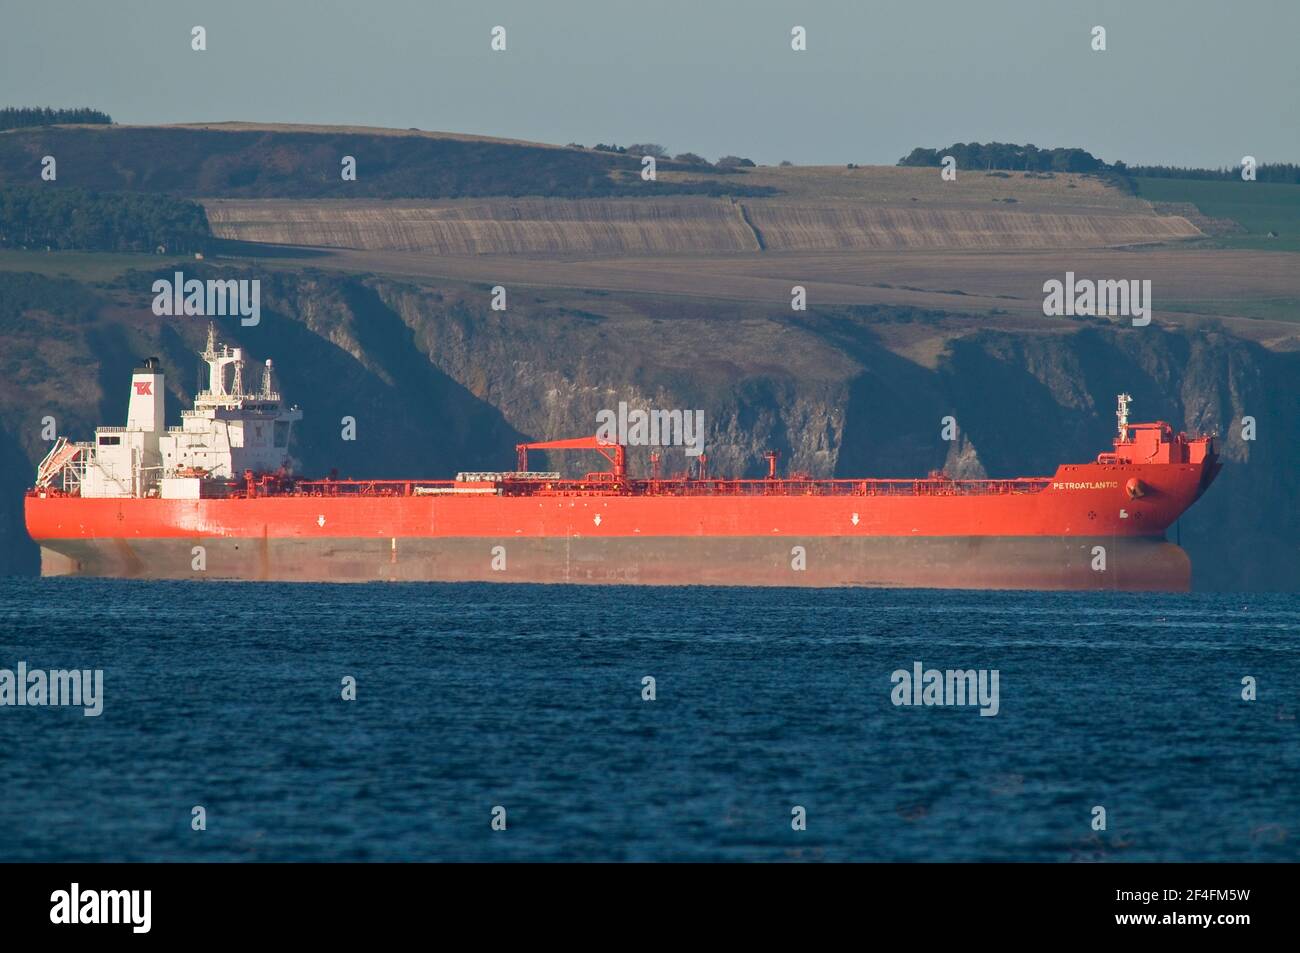 The TEEKAYShipping shuttle tanker Petroatlantic moored in the Moray Firth midway between Nairn and the Black Isle in North East Scotland. Stock Photo